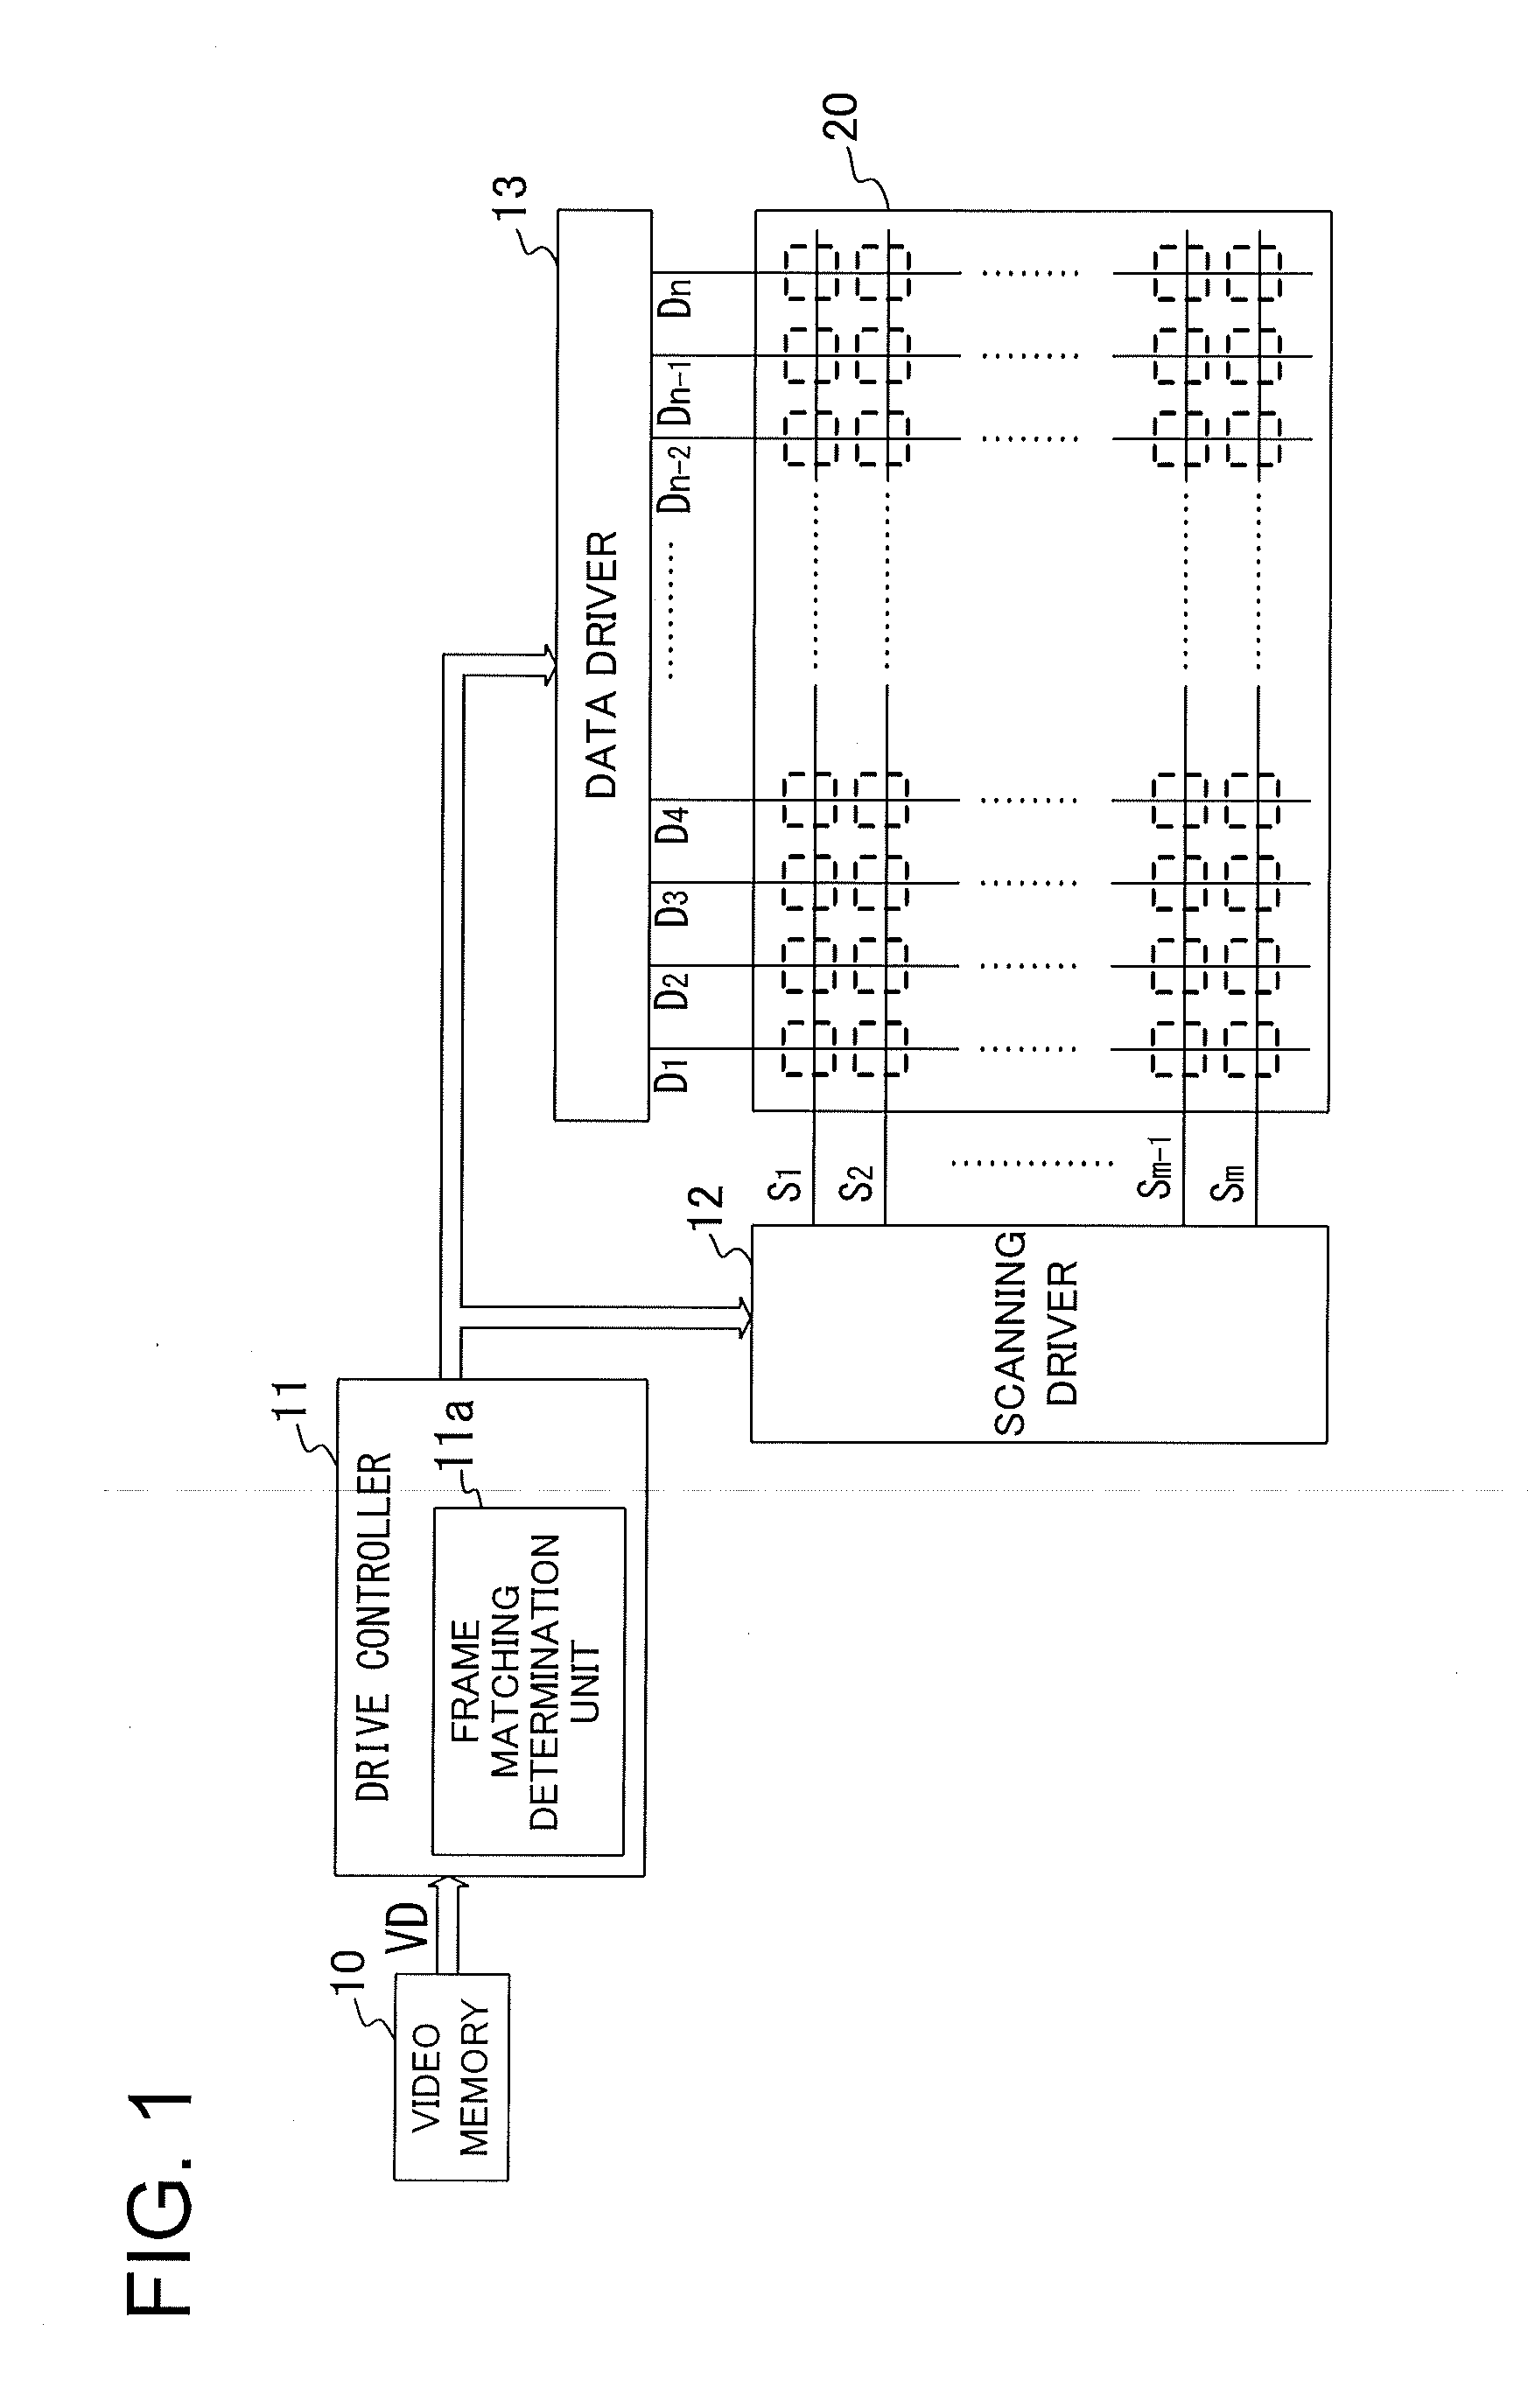 Driving device for driving display unit